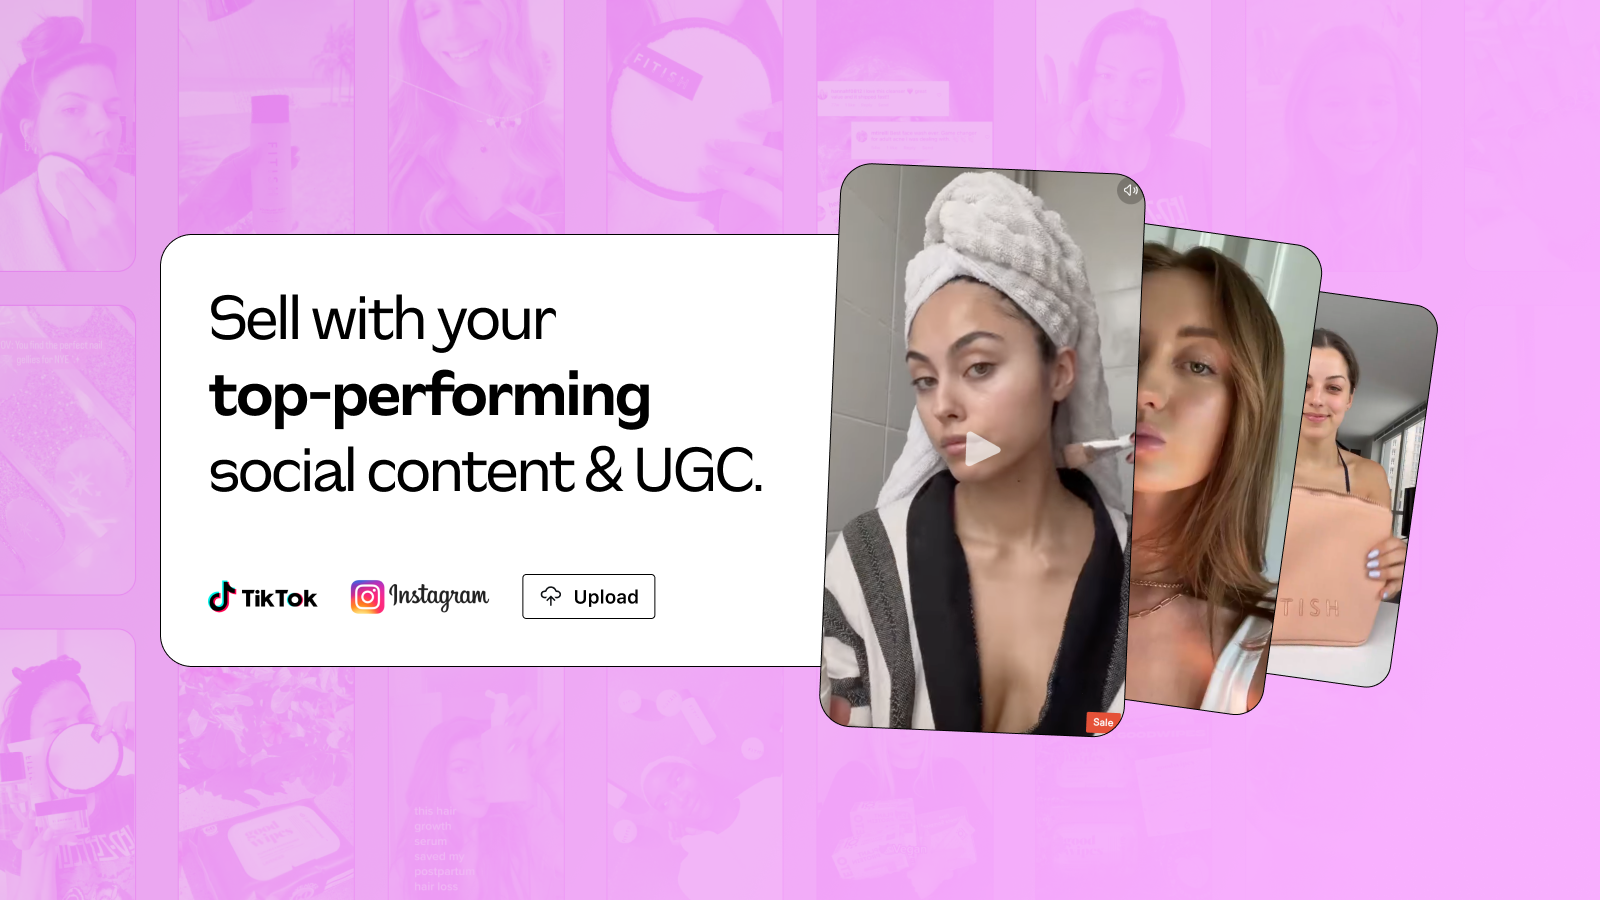 Leverage your high-performing content from Instagram & TikTok